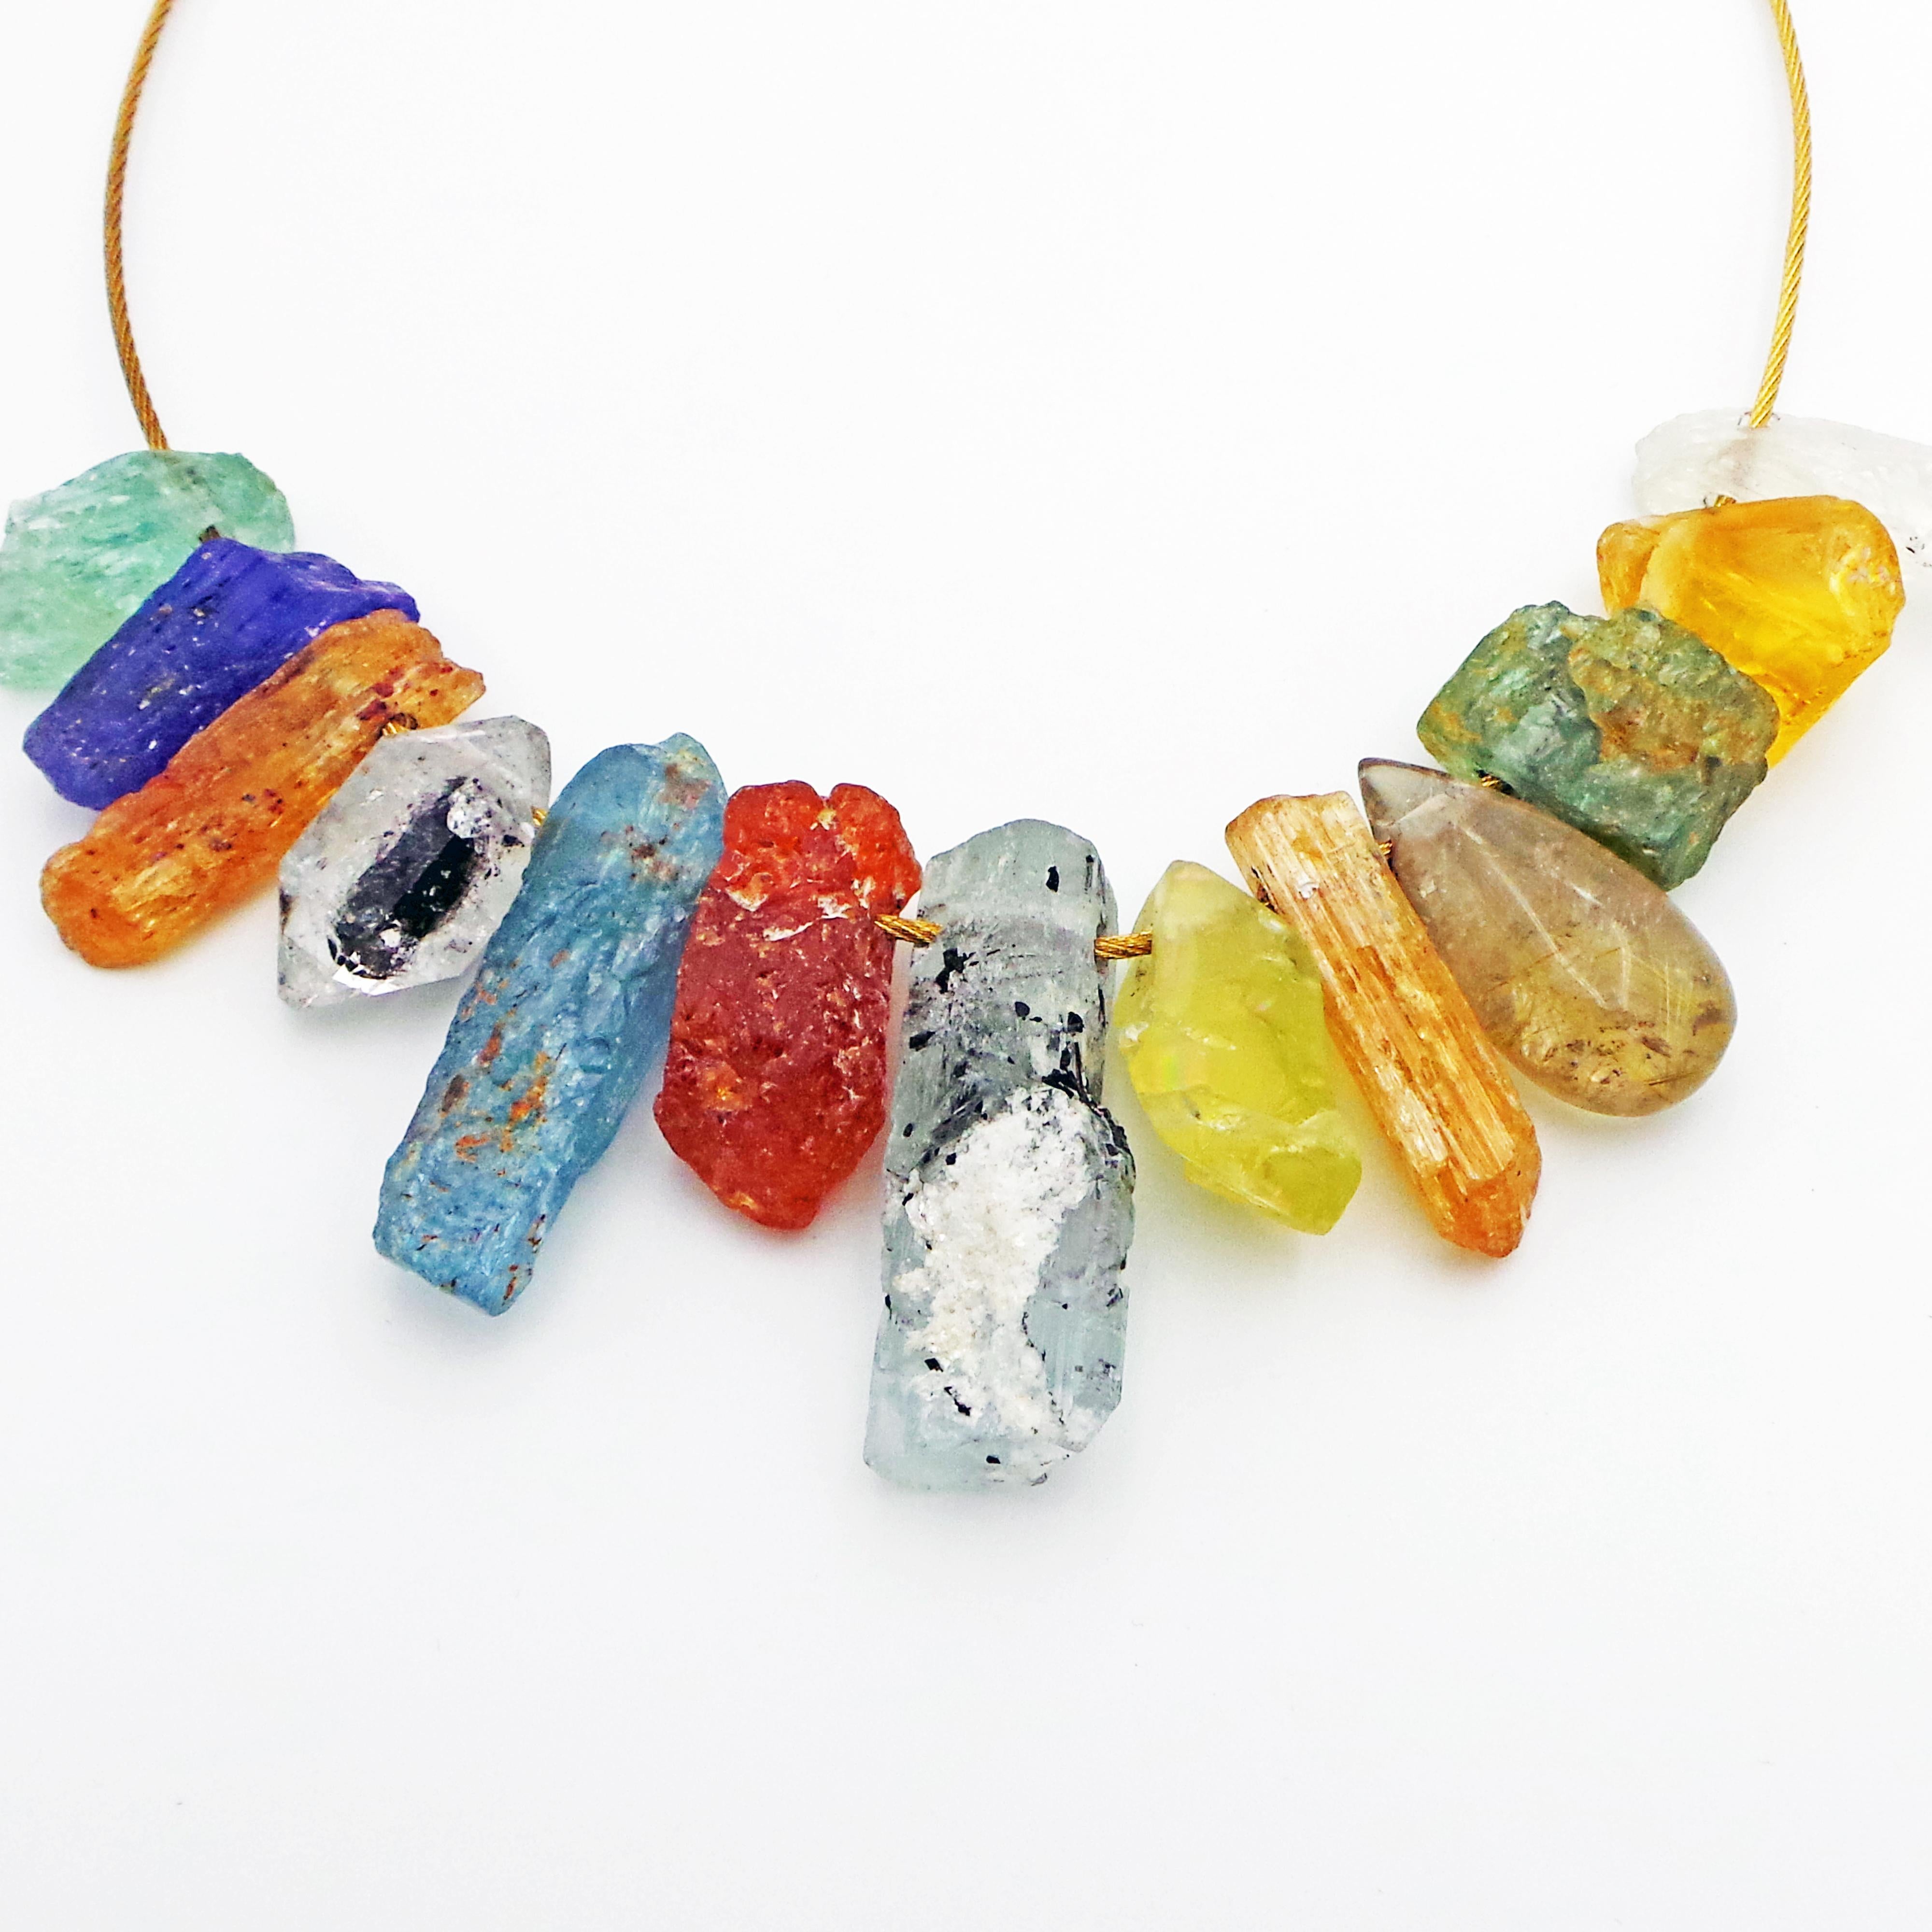 One-of-a-kind, colorful assortment of gemstones in their rough crystal form strung on a German-made 18k yellow gold woven wire necklace. Gold neck wire is finished with a 